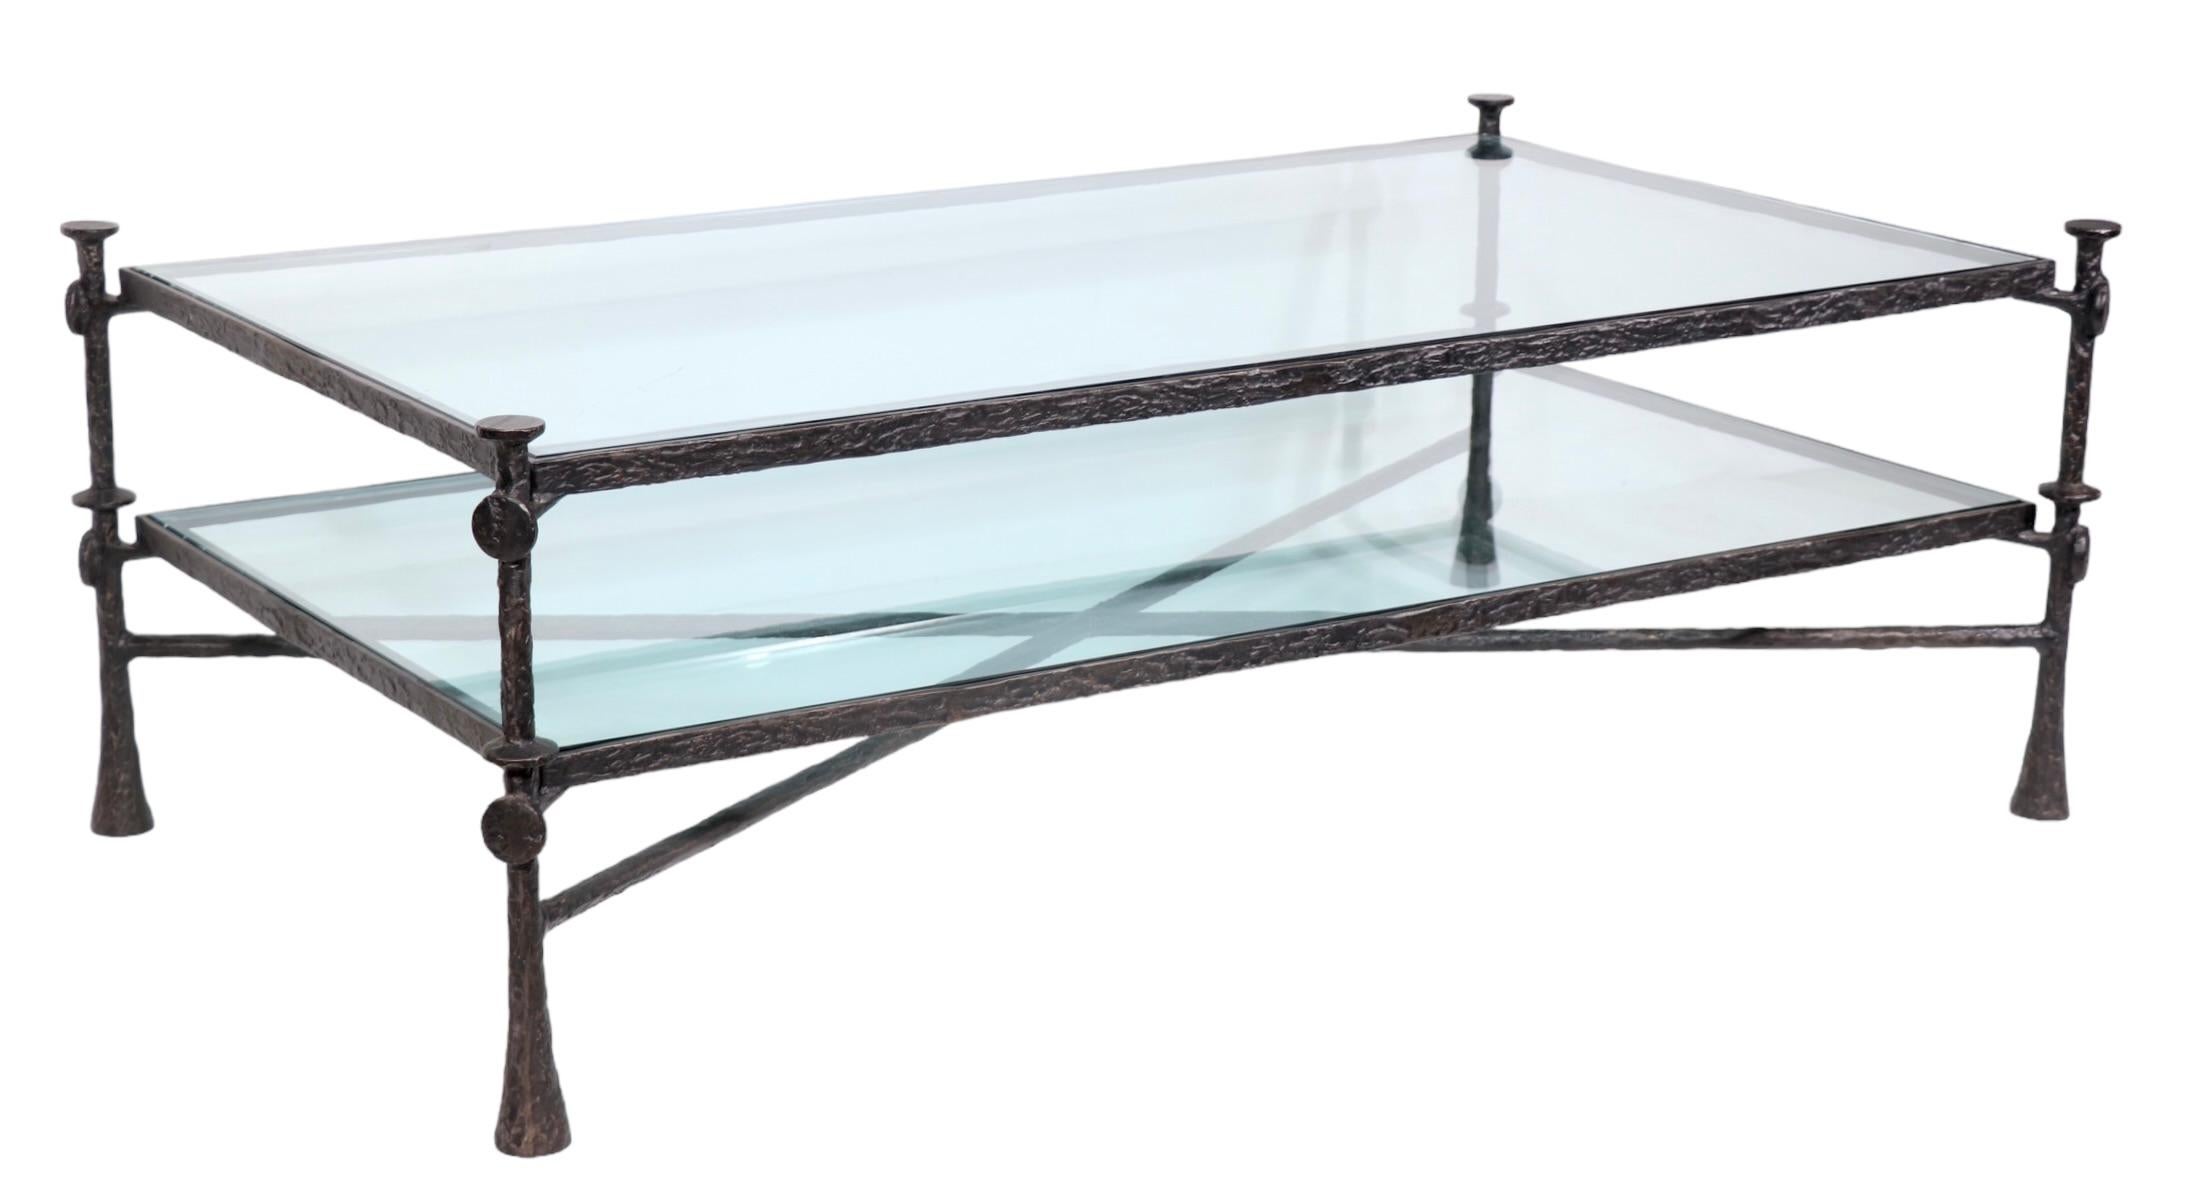 20th Century Brutalist Two Tier Glass and Iron Coffee Table after Giacometti c. 1970/1980's